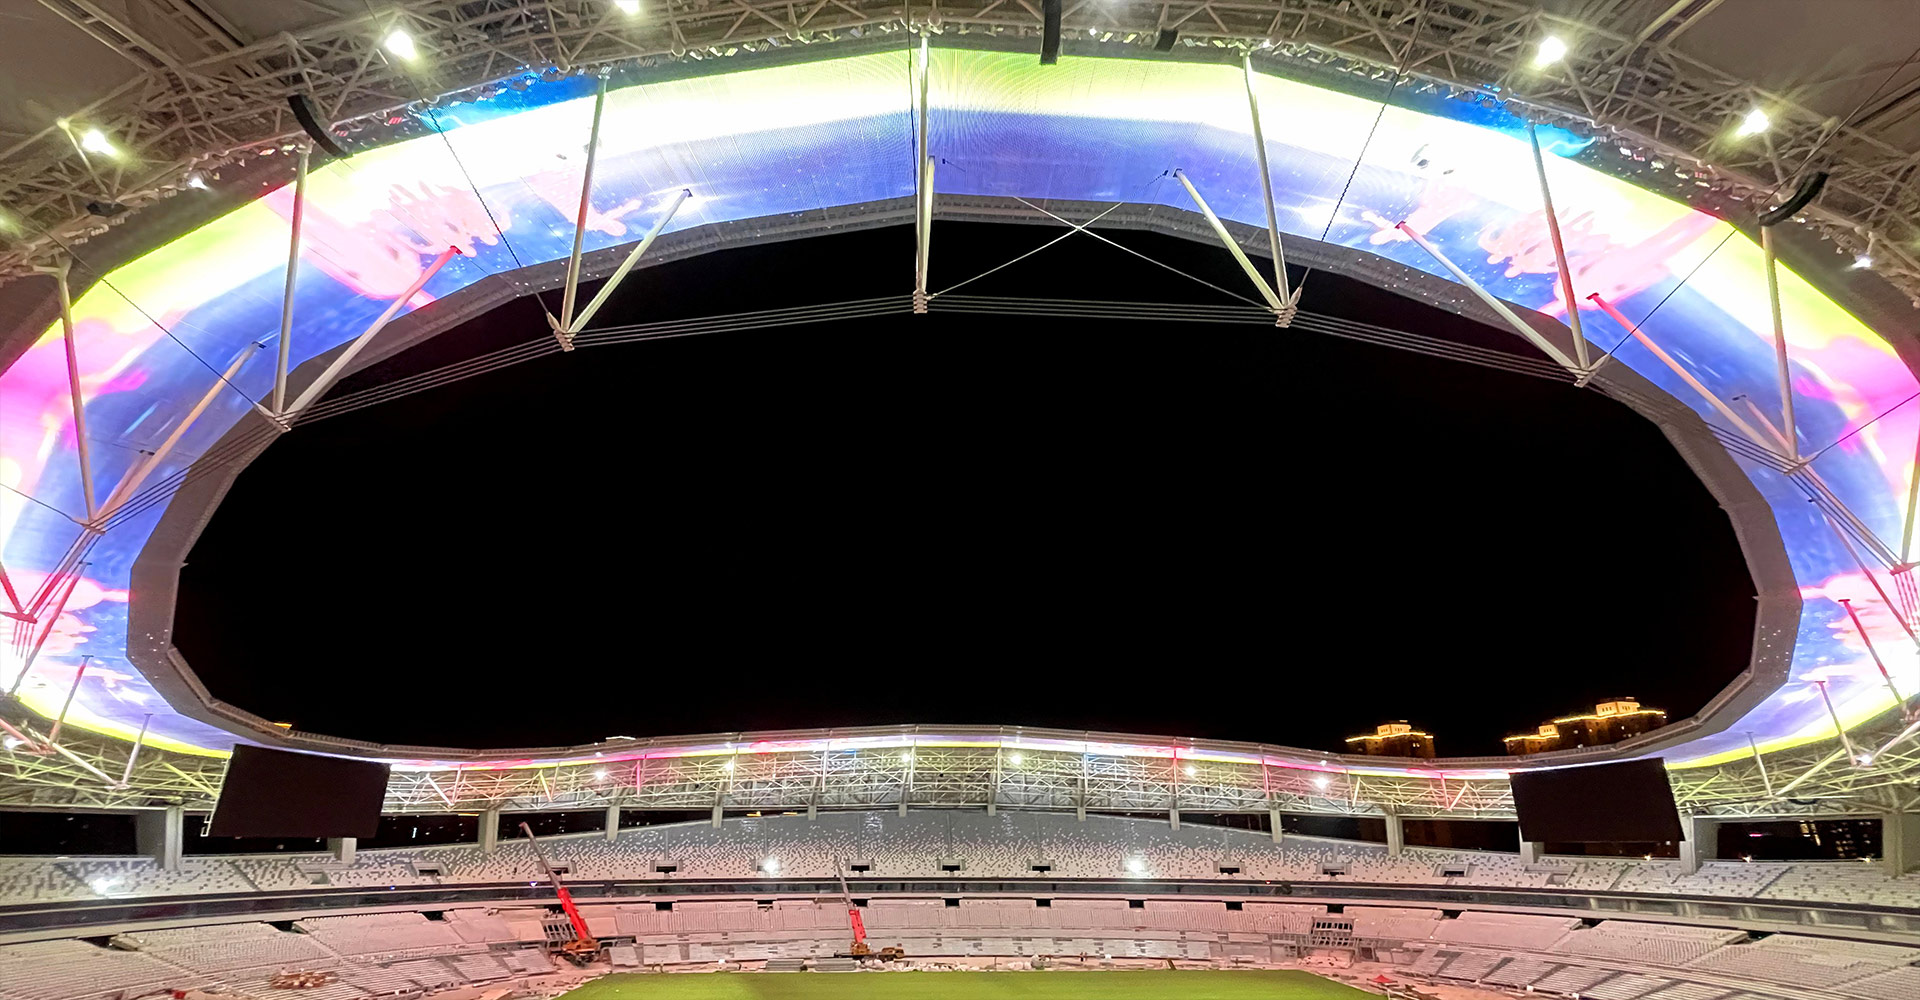 Sansi LED nearly 10,000-square-meter Shanghai Stadium sky screen was selected as one of the top ten classic cases of DAV2022